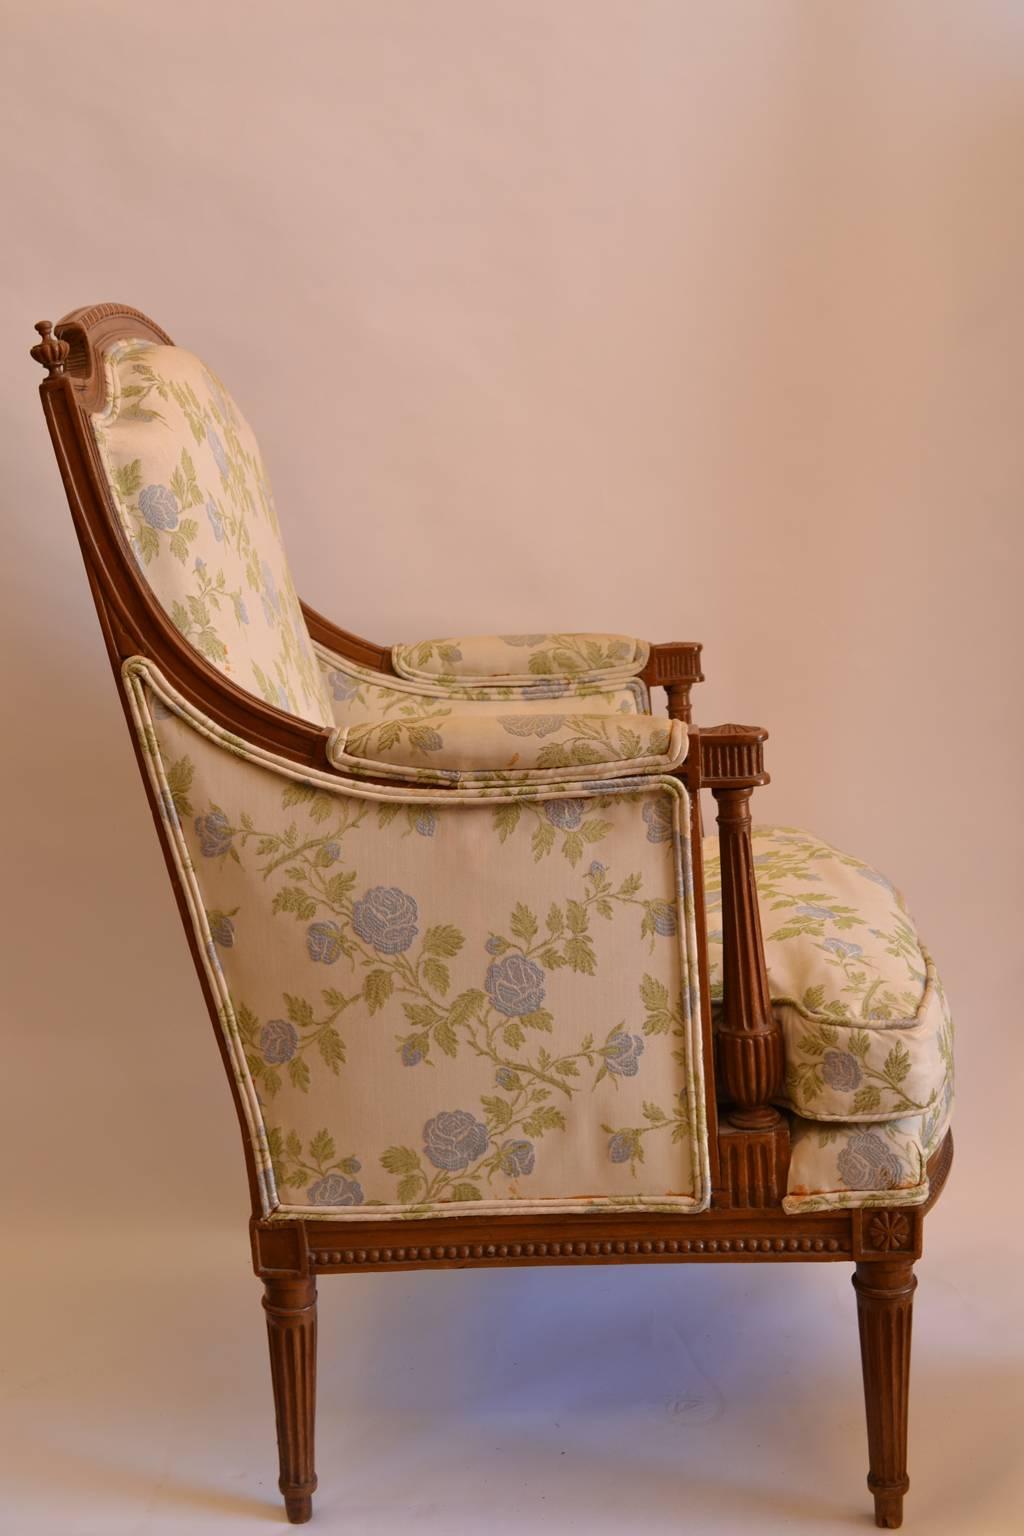 A Louis XVI carved walnut Bergère, late 18th century, Georges Jacob (1739-1814, maître in 1765), stamped, arched crest rail, lobed finials, padded arms, fluted and reeded uprights, beaded seat rail, rosette blocks, tapered fluted legs.